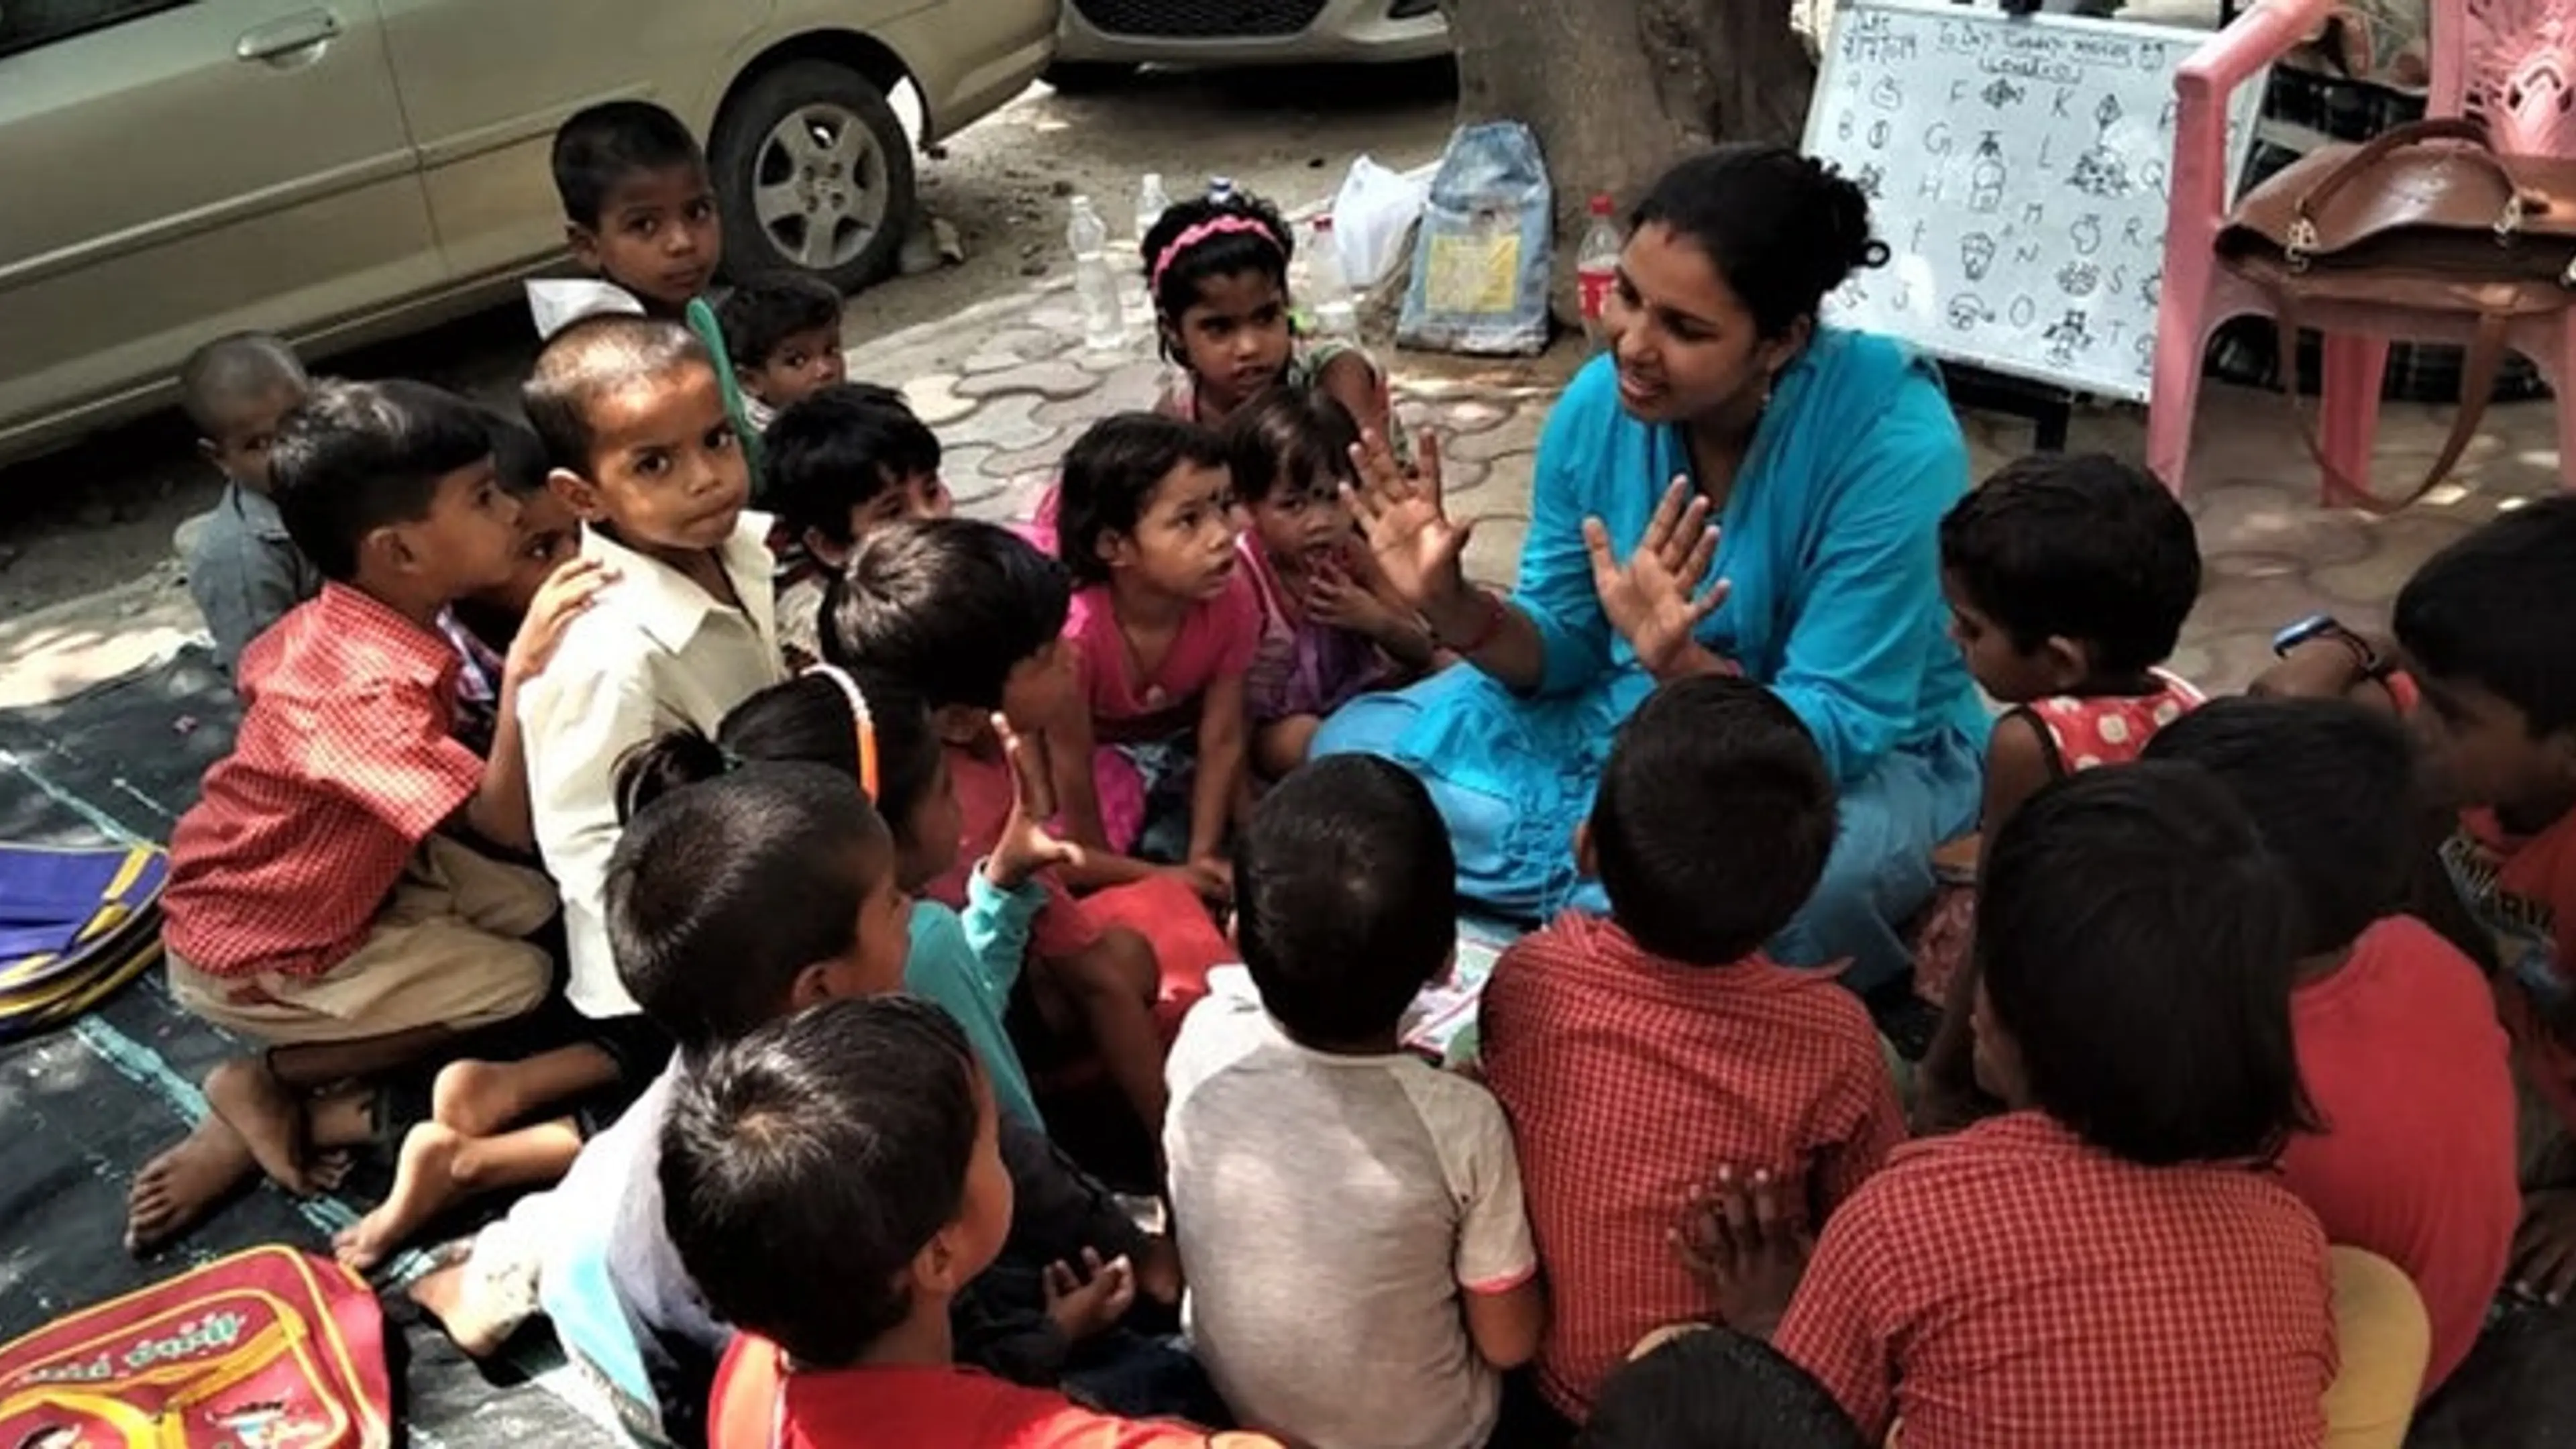 With a focus on education, this NGO has changed the lives of 10,000 underprivileged women and children